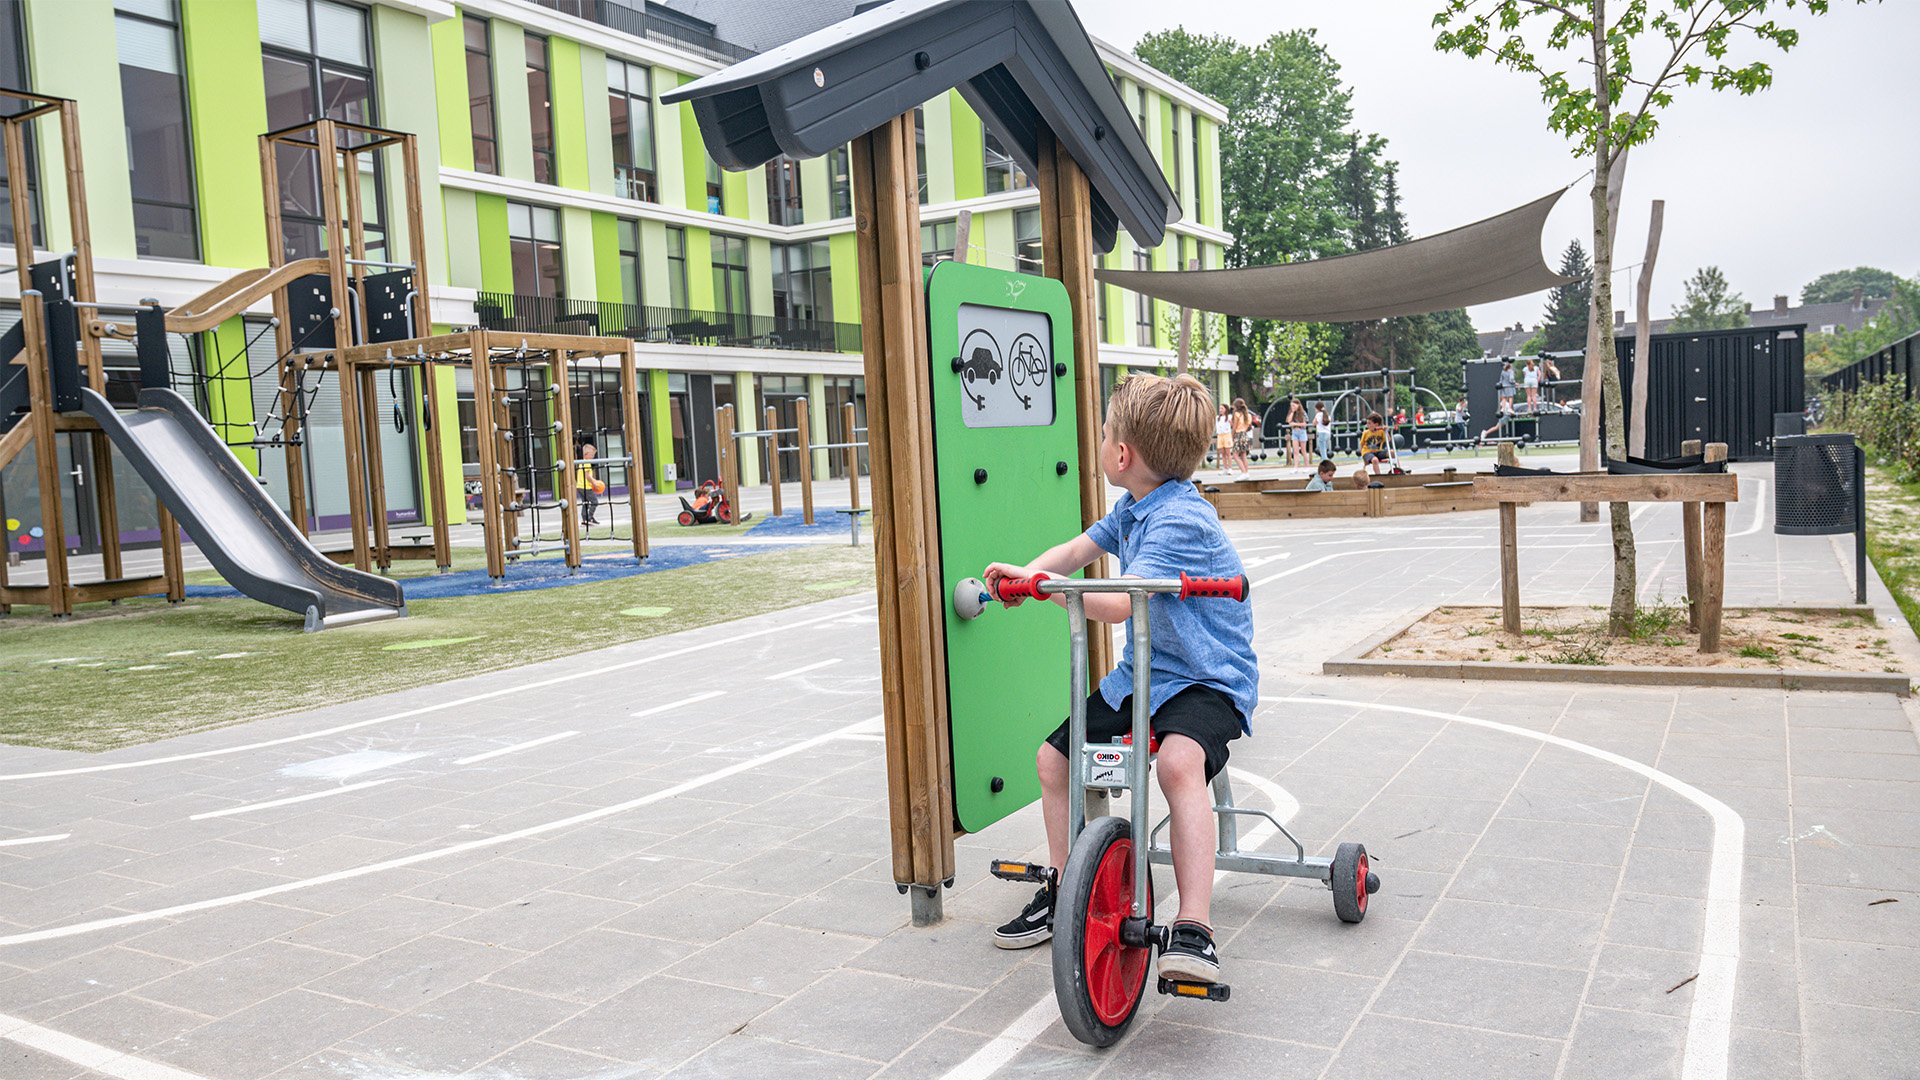 A young child rides a tricycle on the playground of a modern school. The playground has a slide, climbing structures, and a shaded area. The school building has a vibrant green and white facade with large windows. Other children are playing in the background.